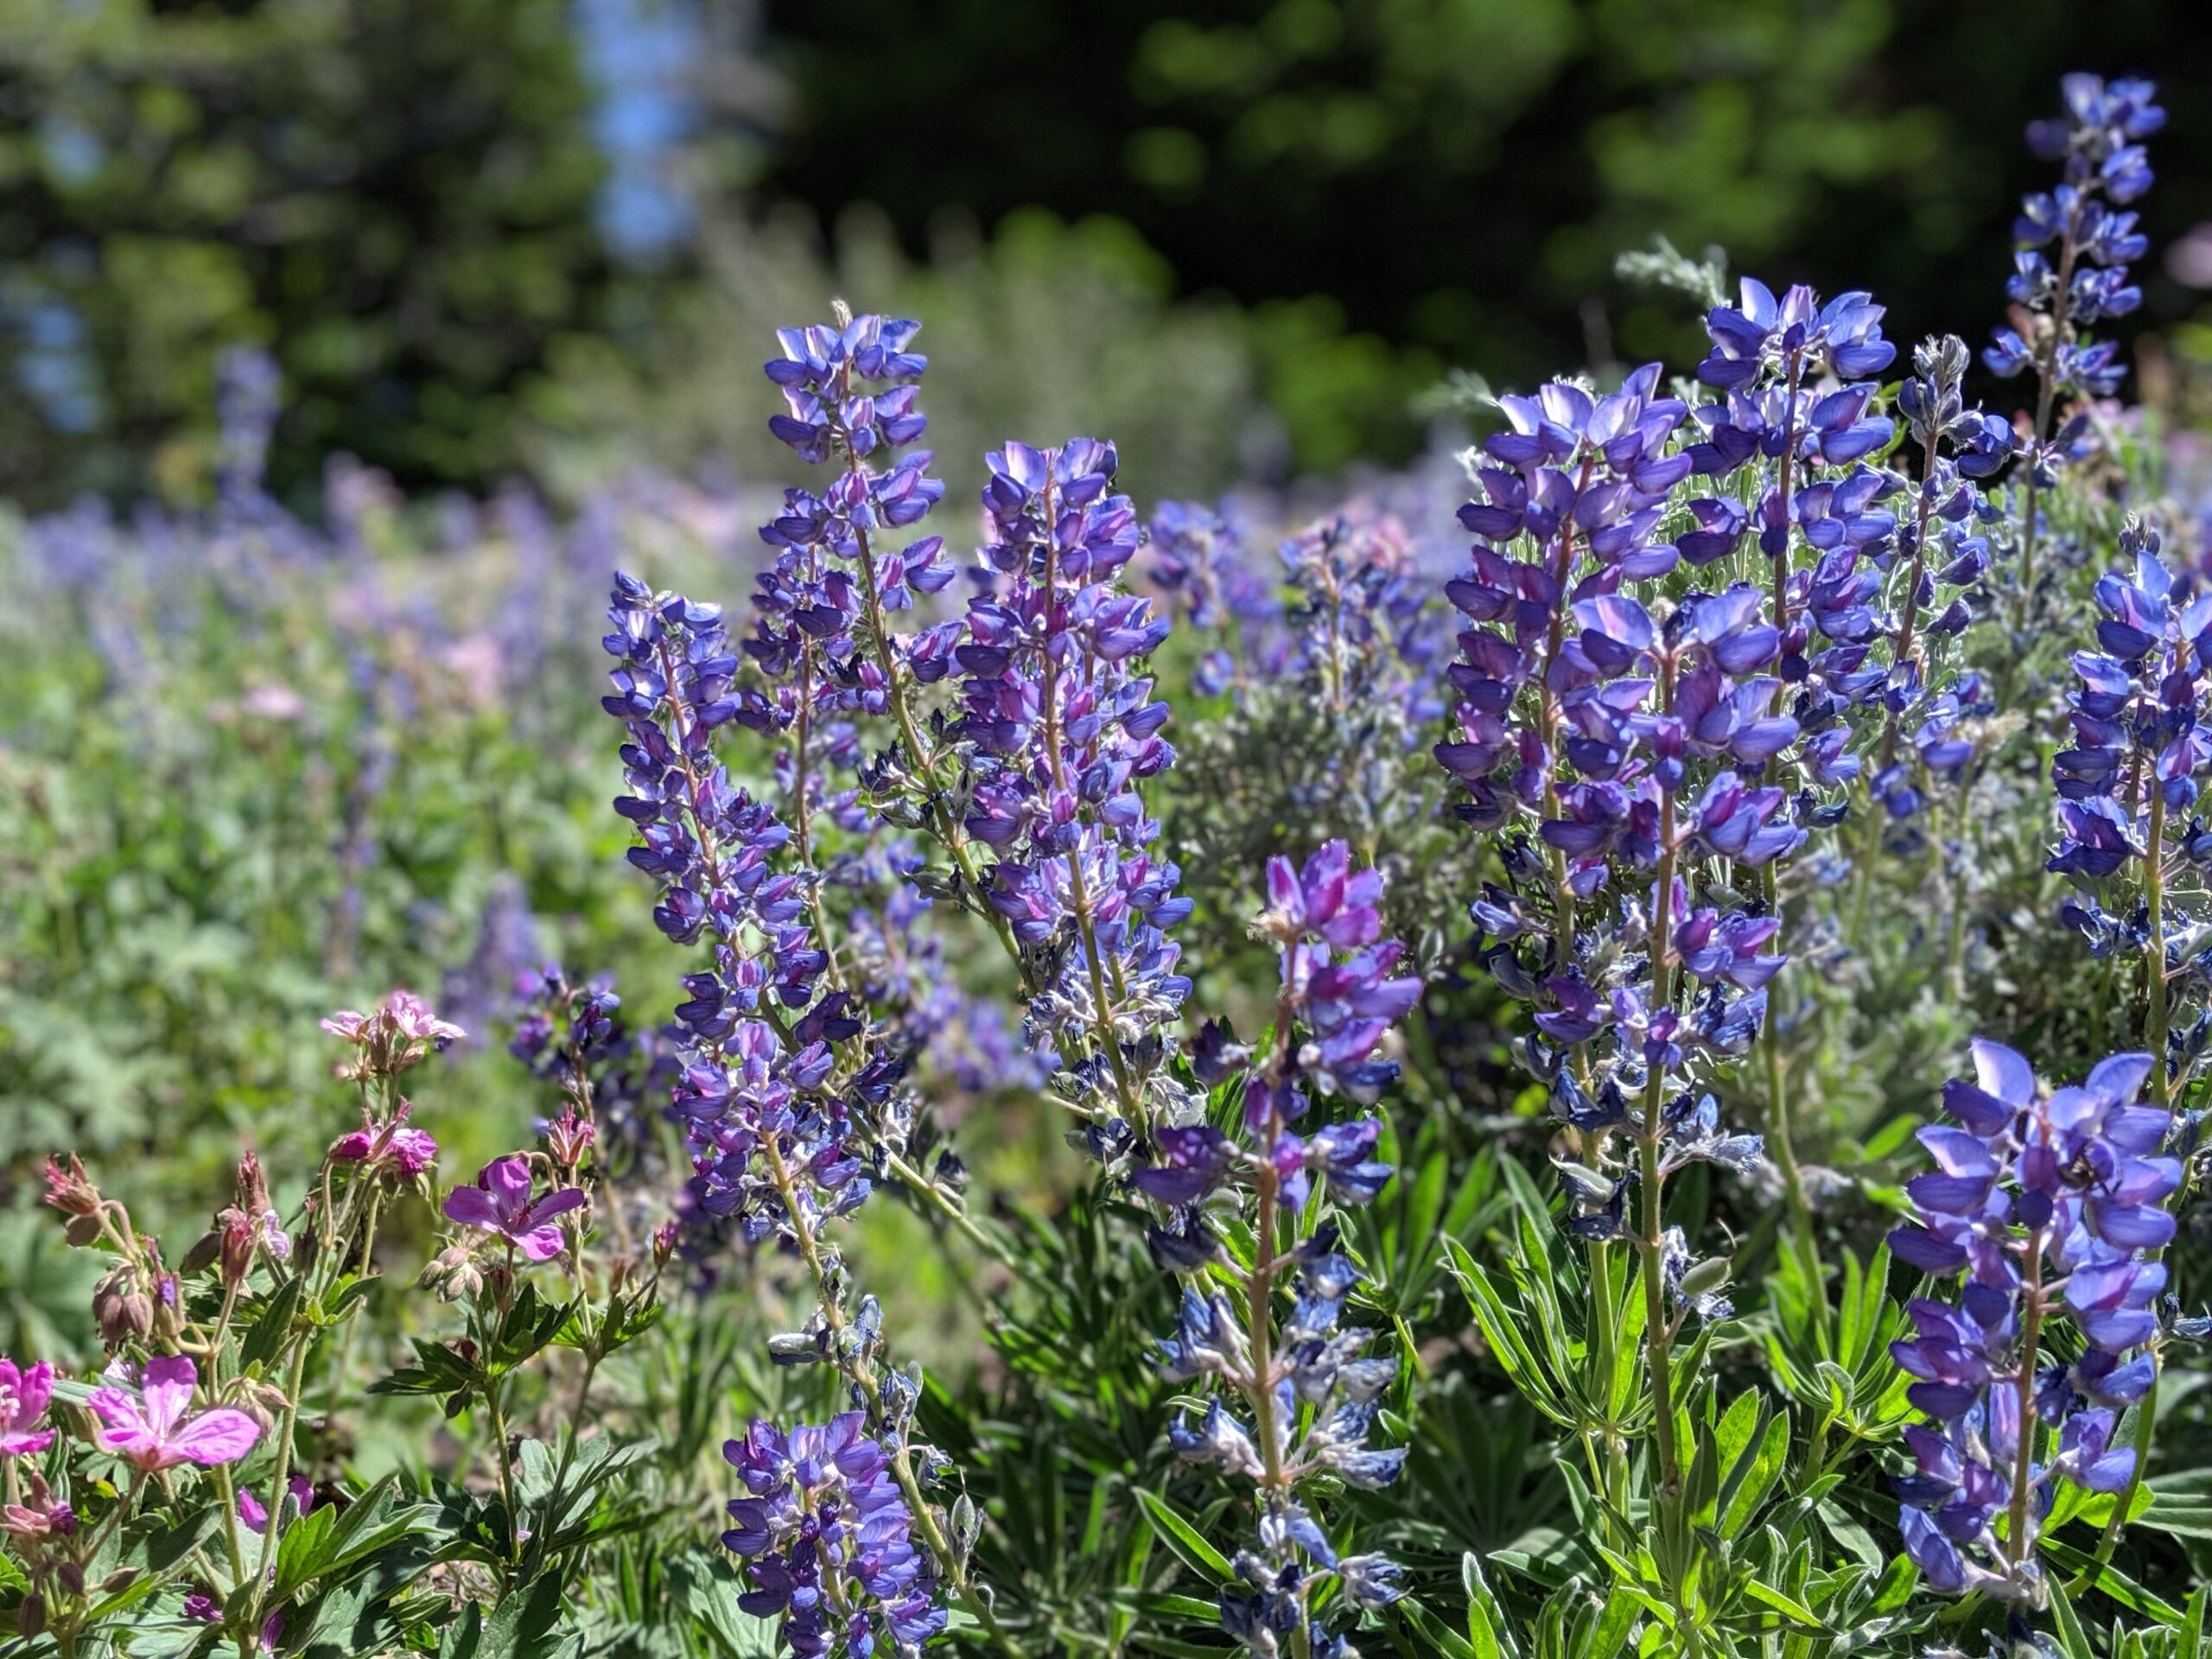 What Are The Benefits of Wildflowers? - Leave No Trace